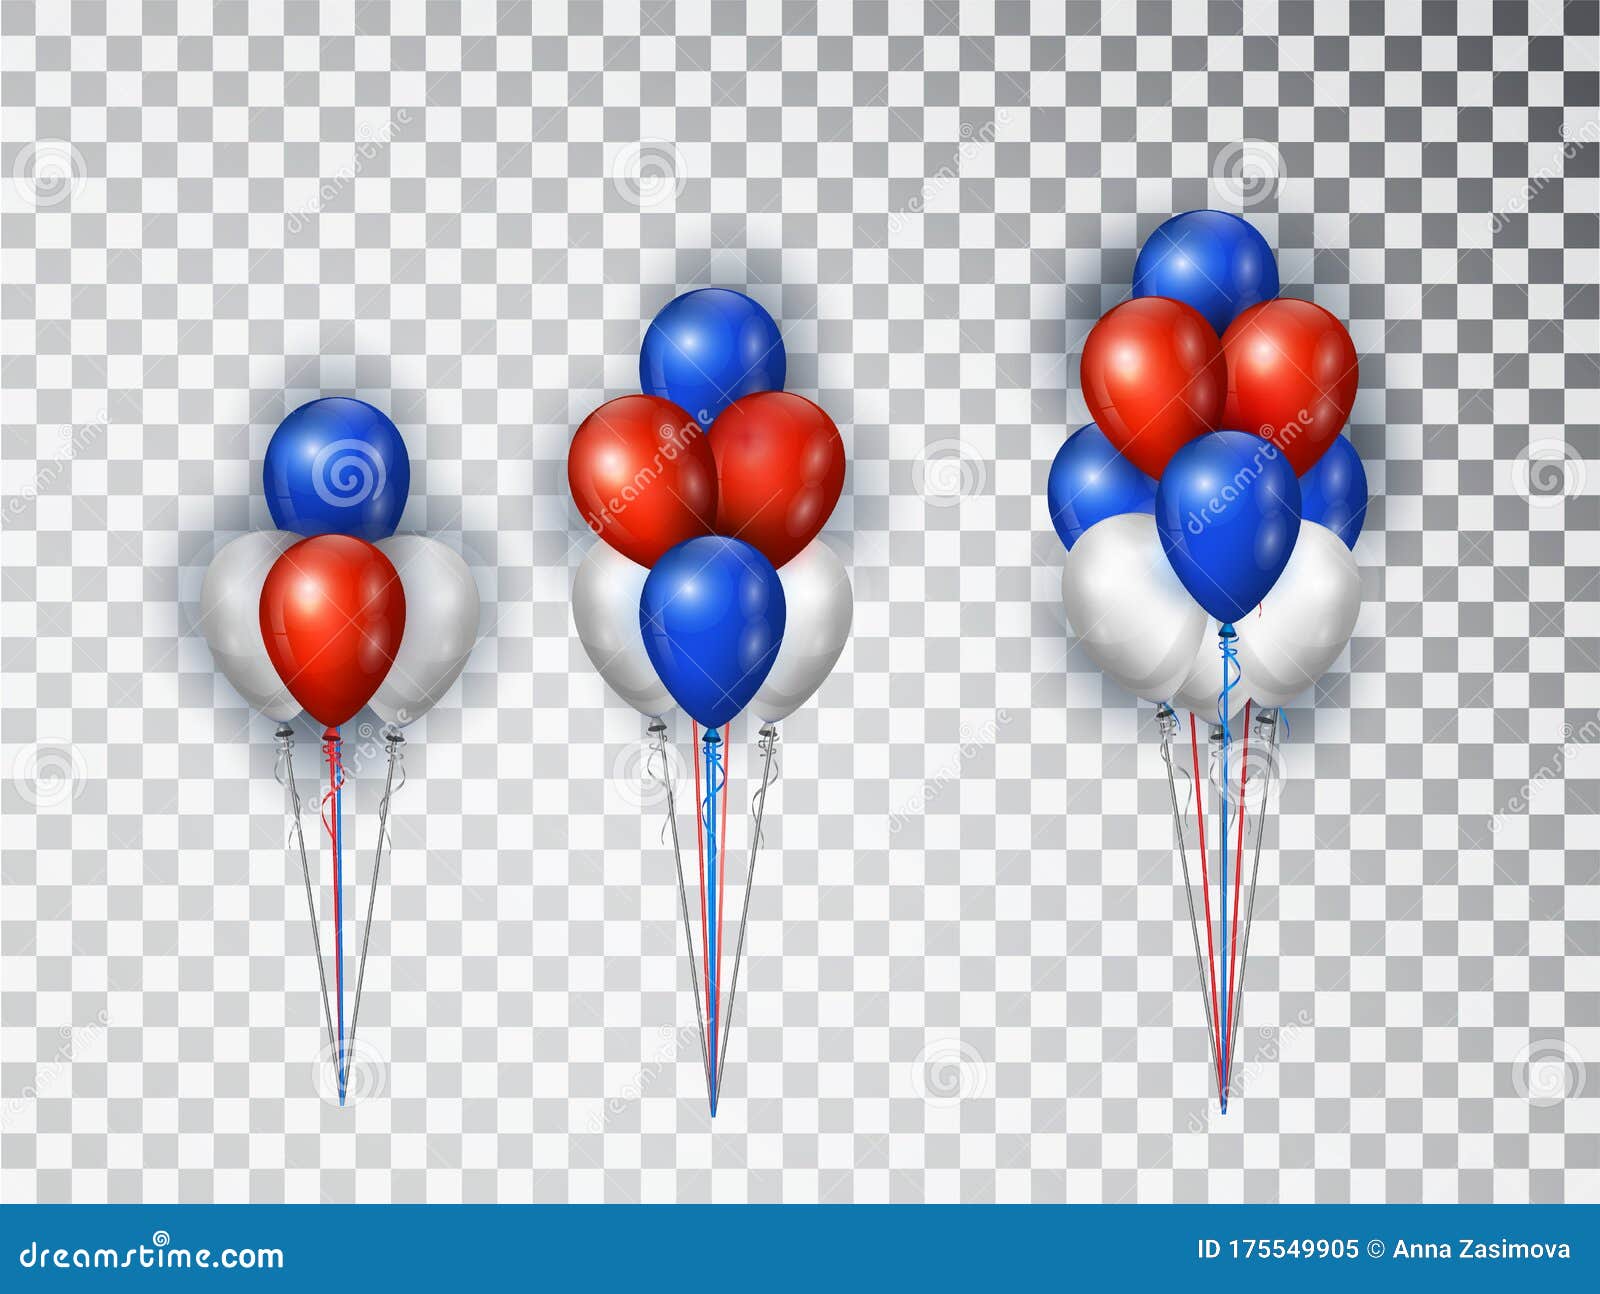 helium balloons composicion in national colors of the american flag  on transparent background. usa balloon